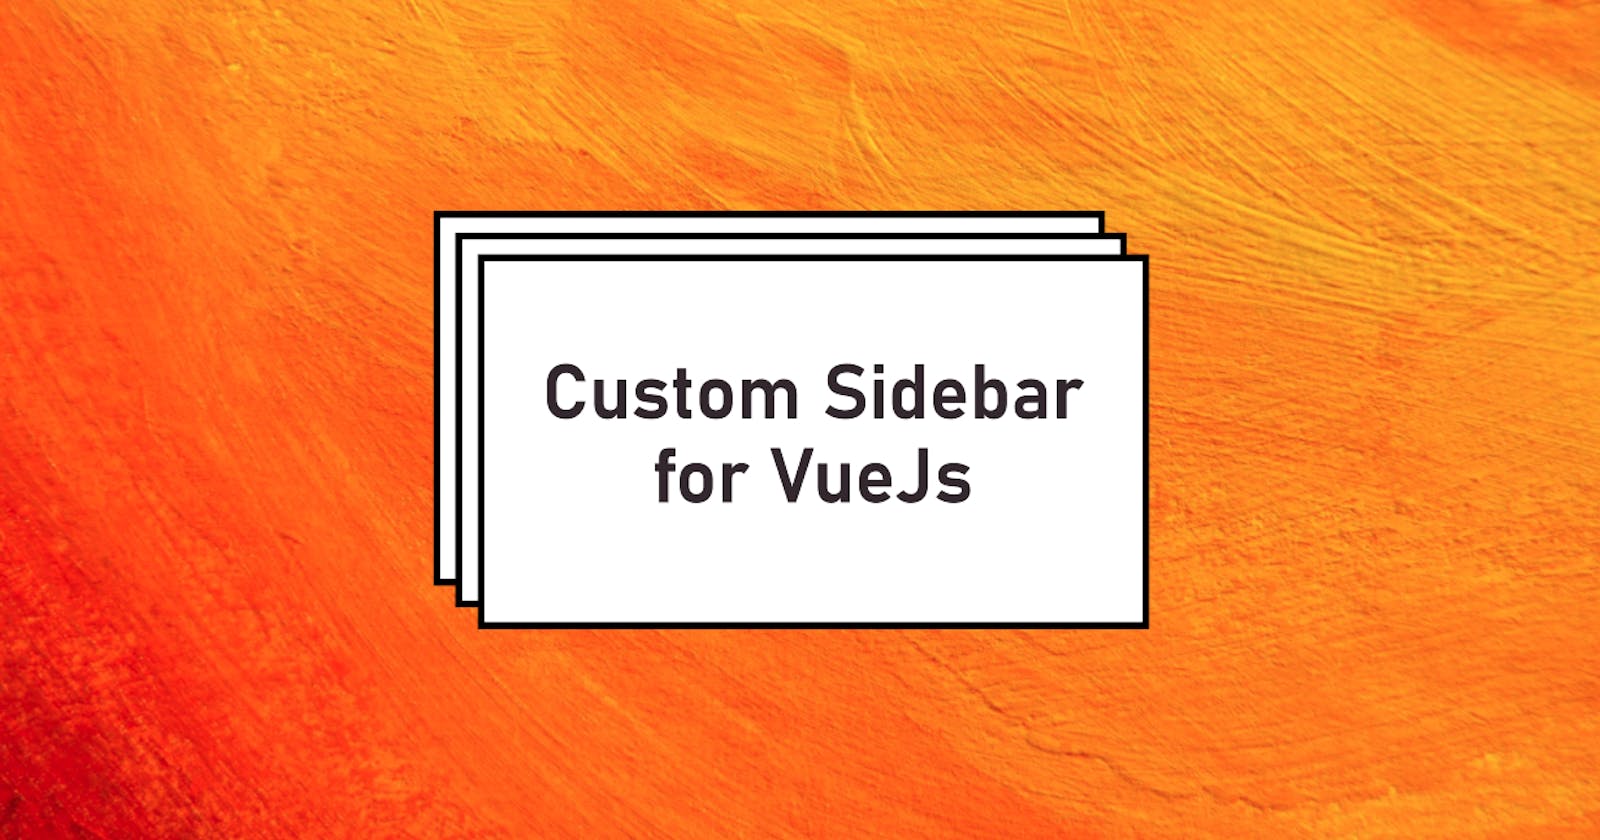 Let's build a custom animated VueJs sidebar with TailwindCSS